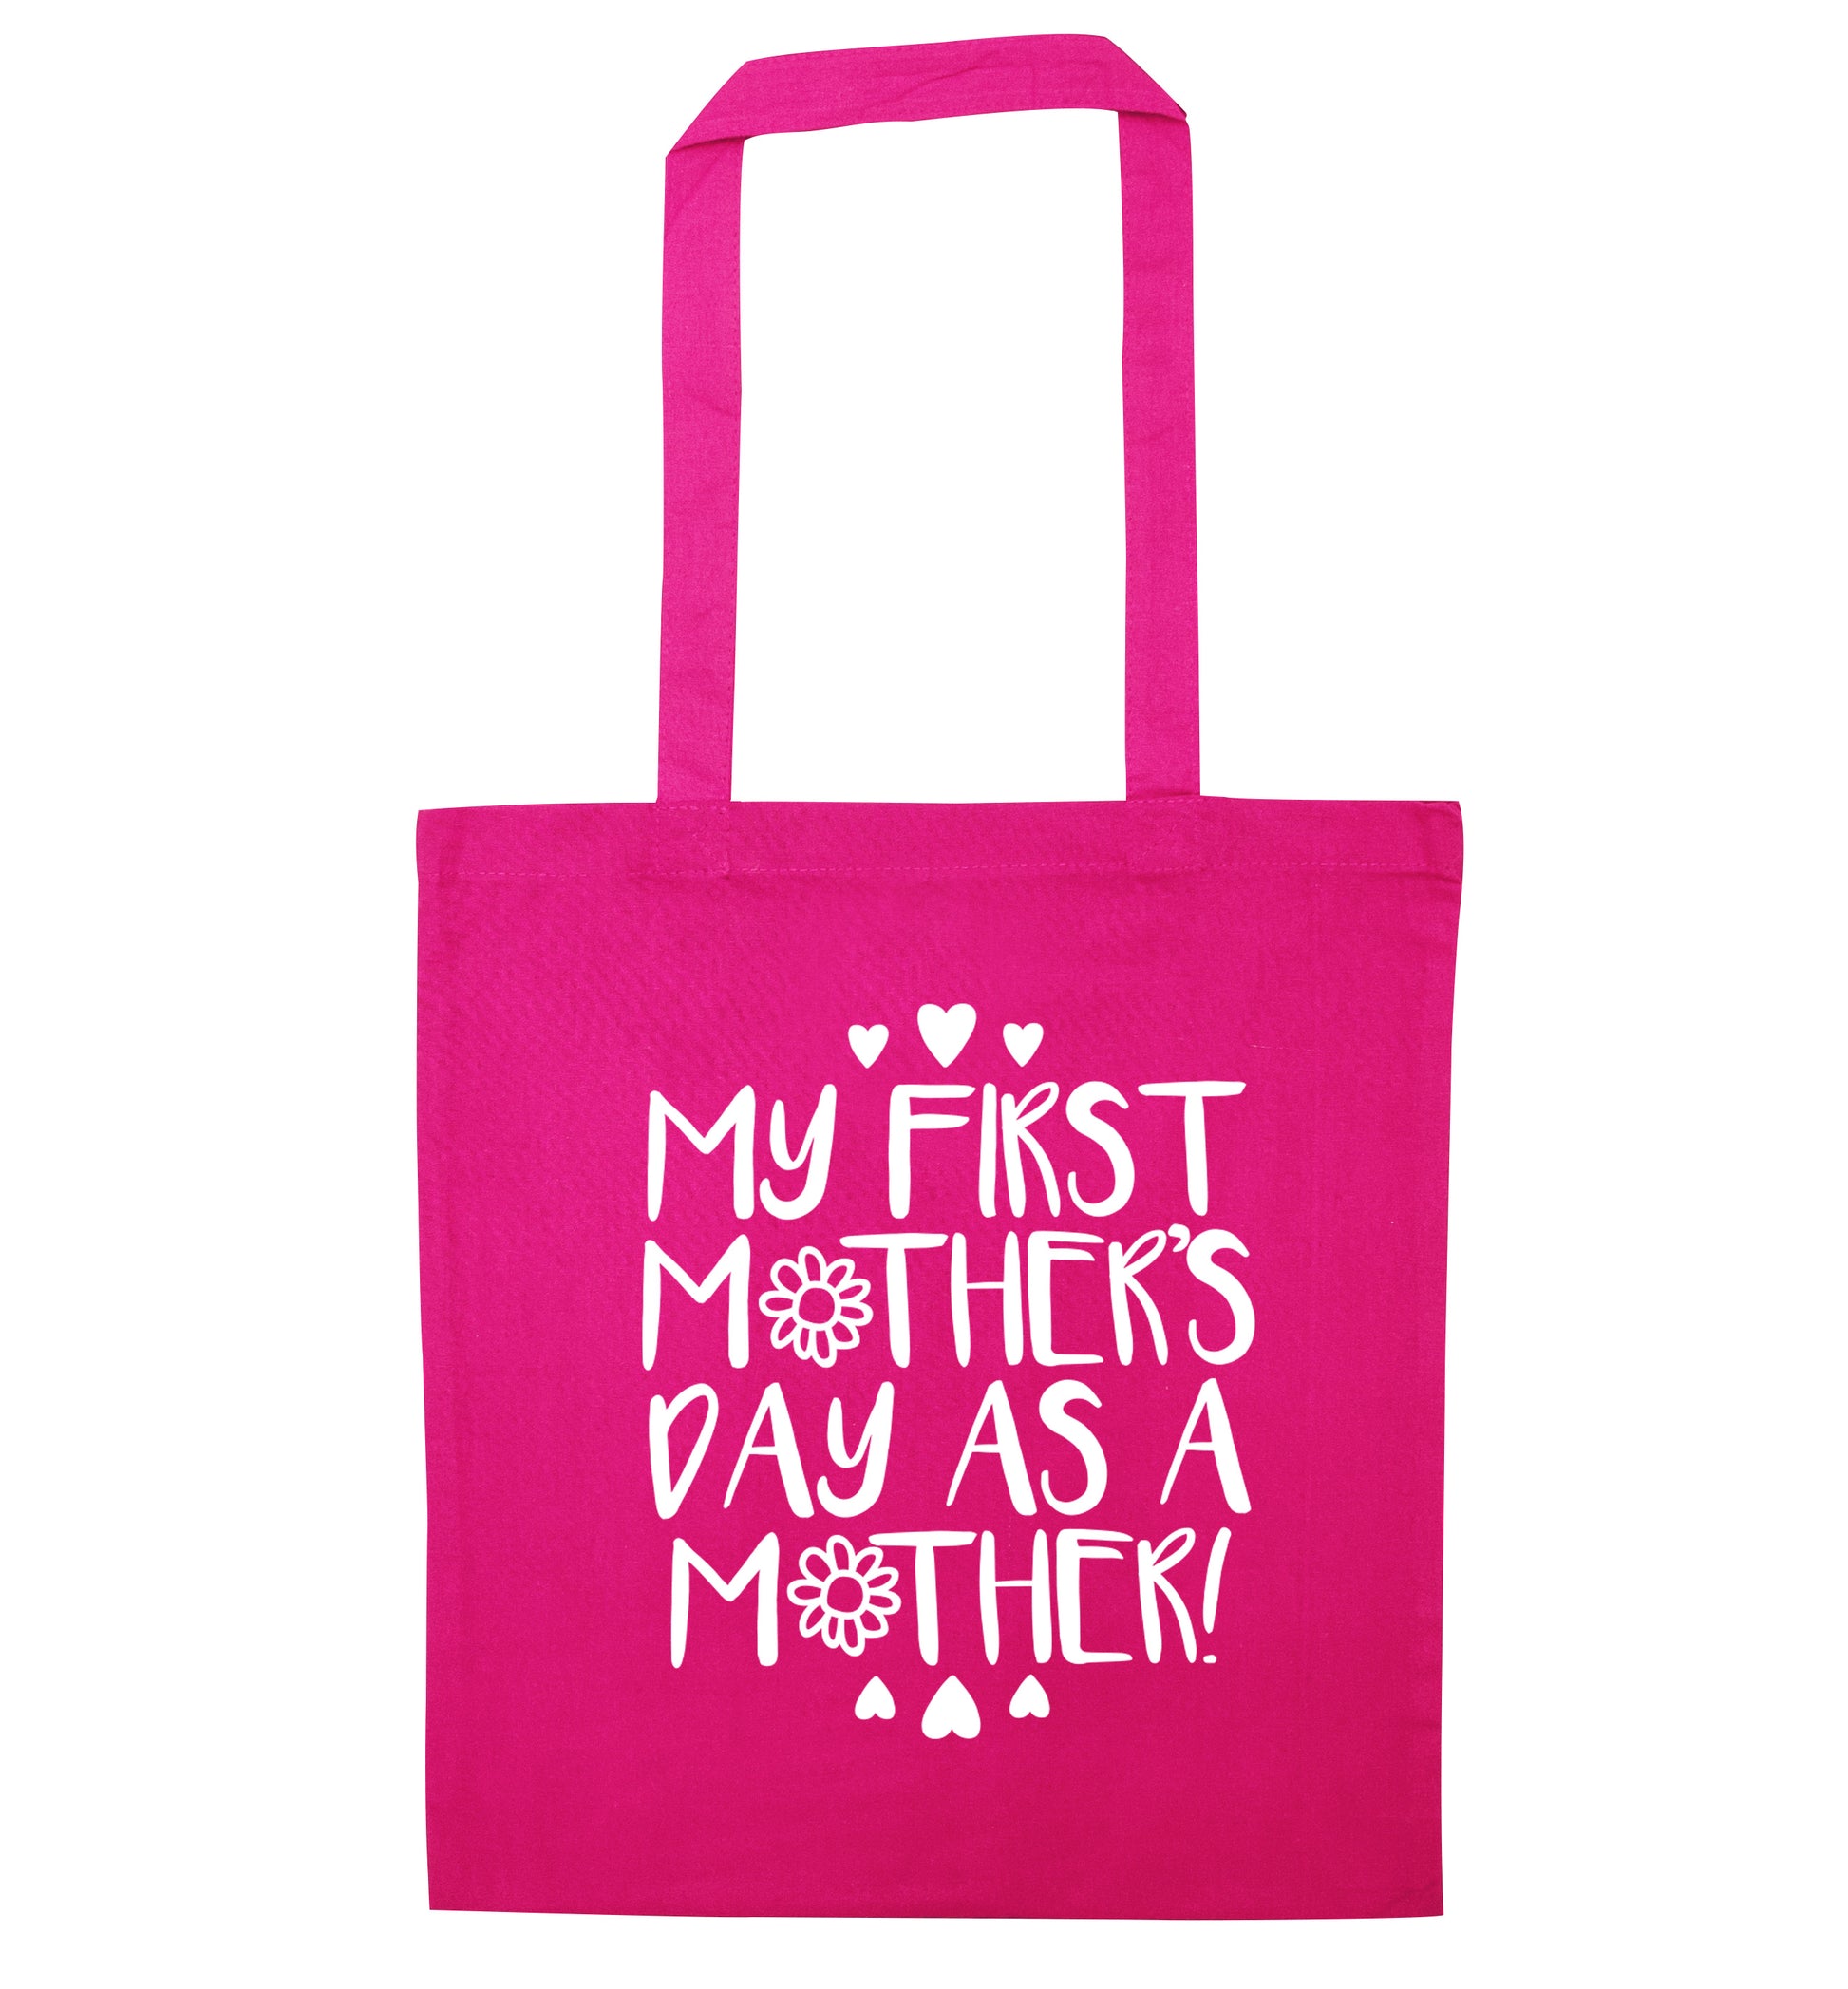 My first mother's day as a mother pink tote bag